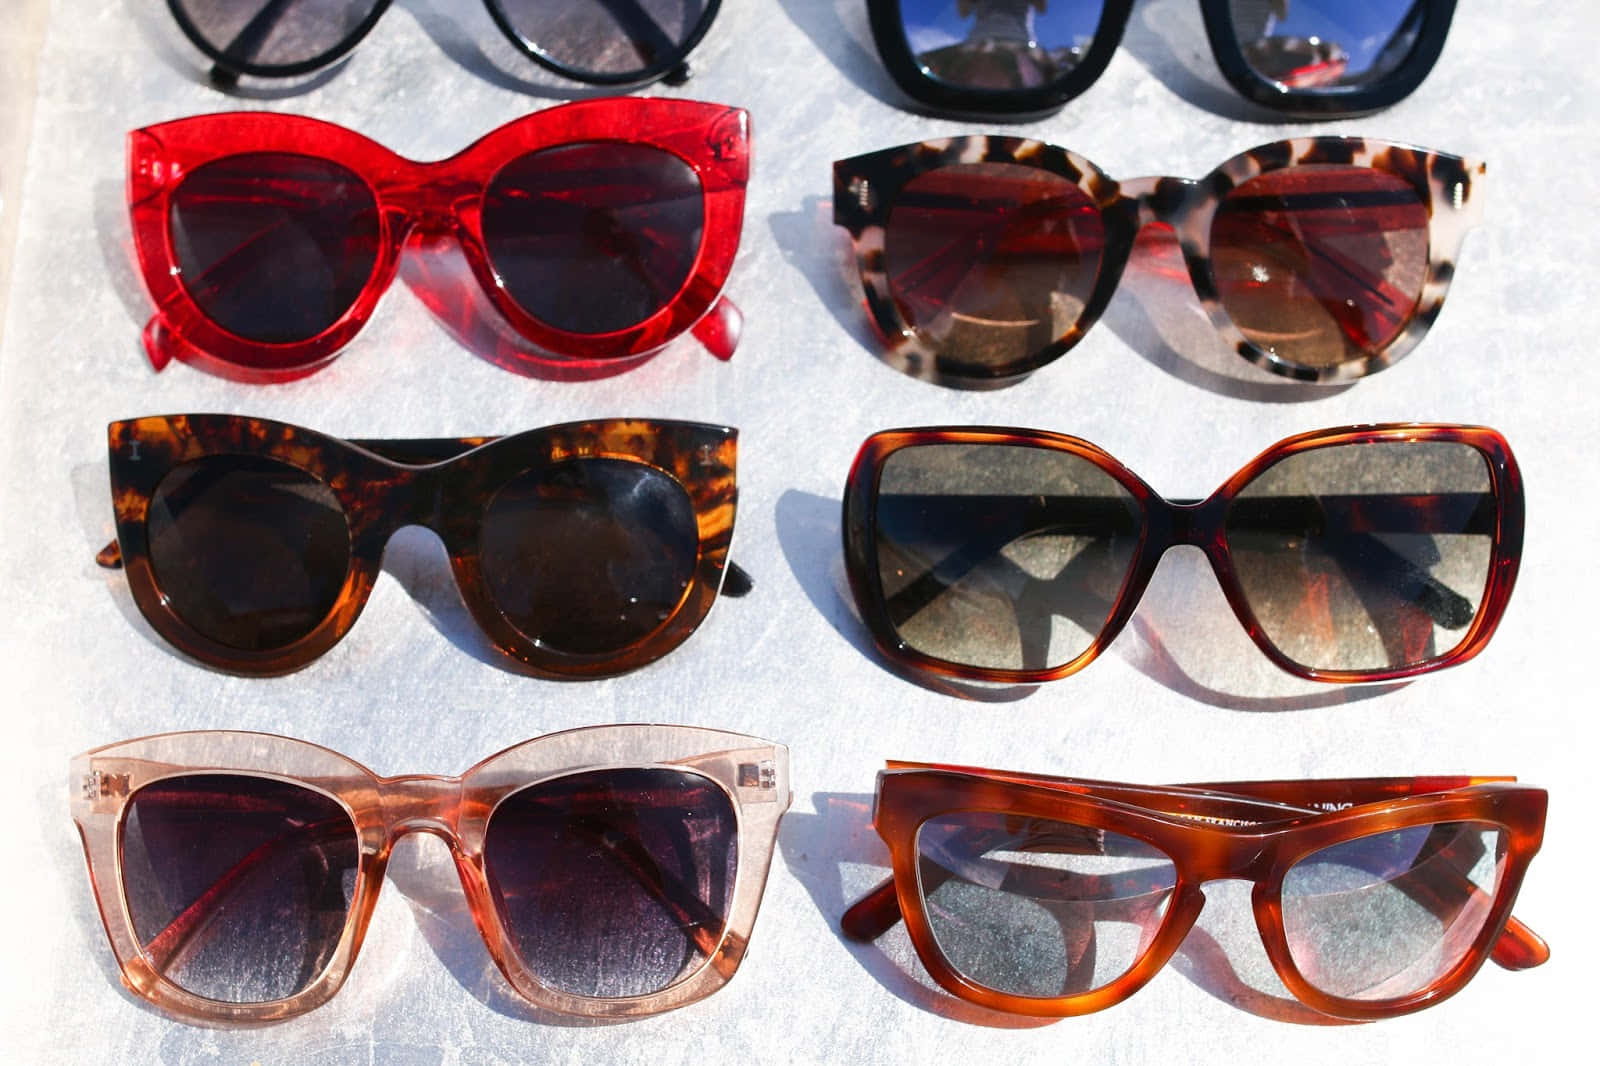 Don't miss the summer sun with stylish sunglasses